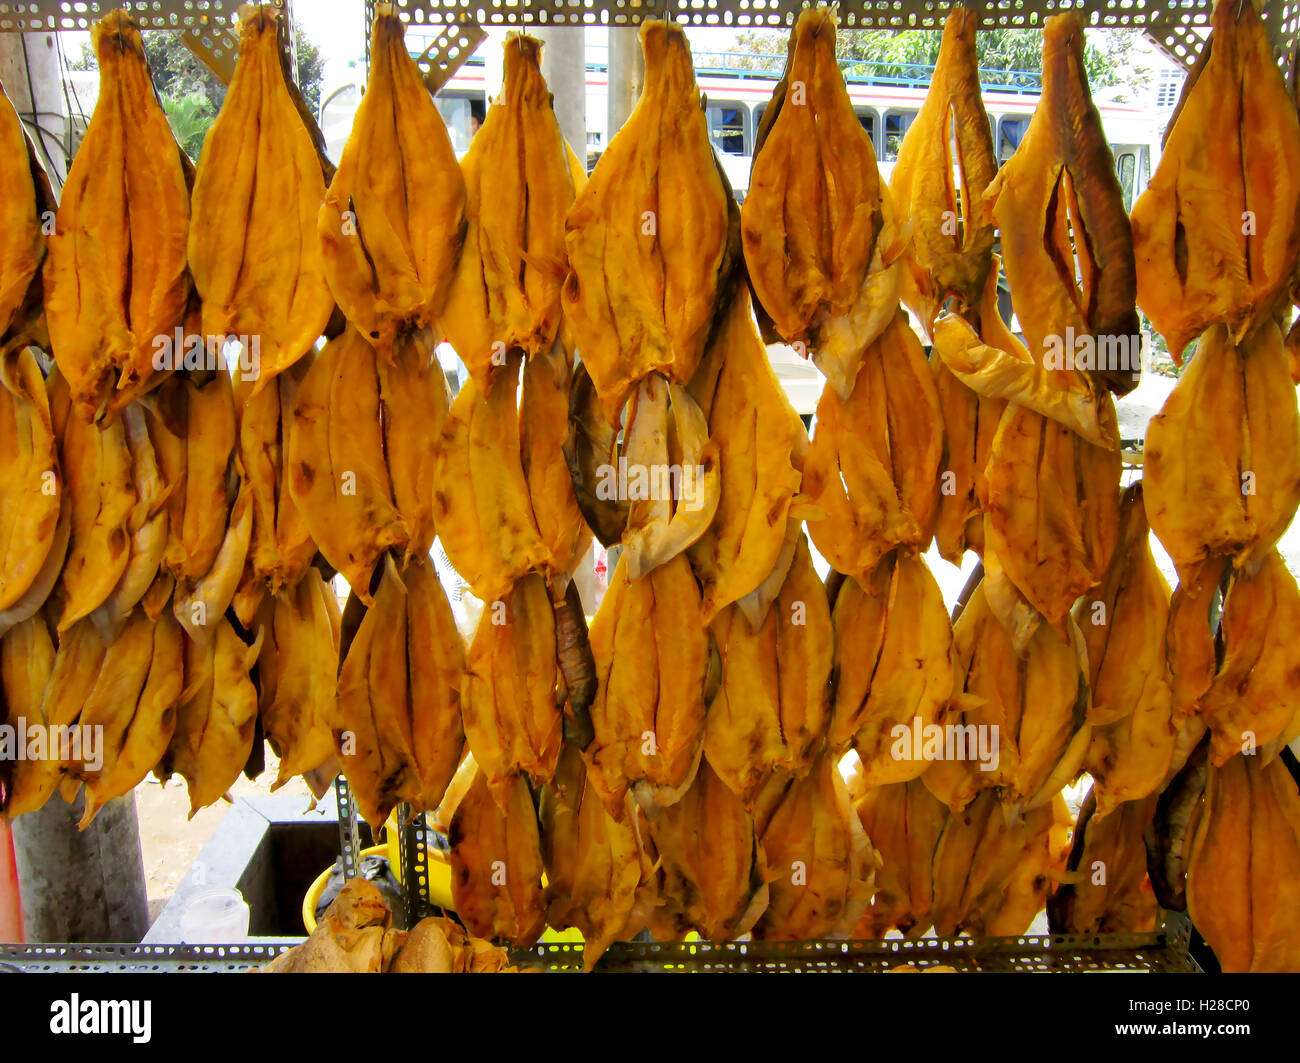 An Giang, Vietnam - July 3, 2016: Dried Vietnamese catfish or pangasius are for sale on the street Stock Photo